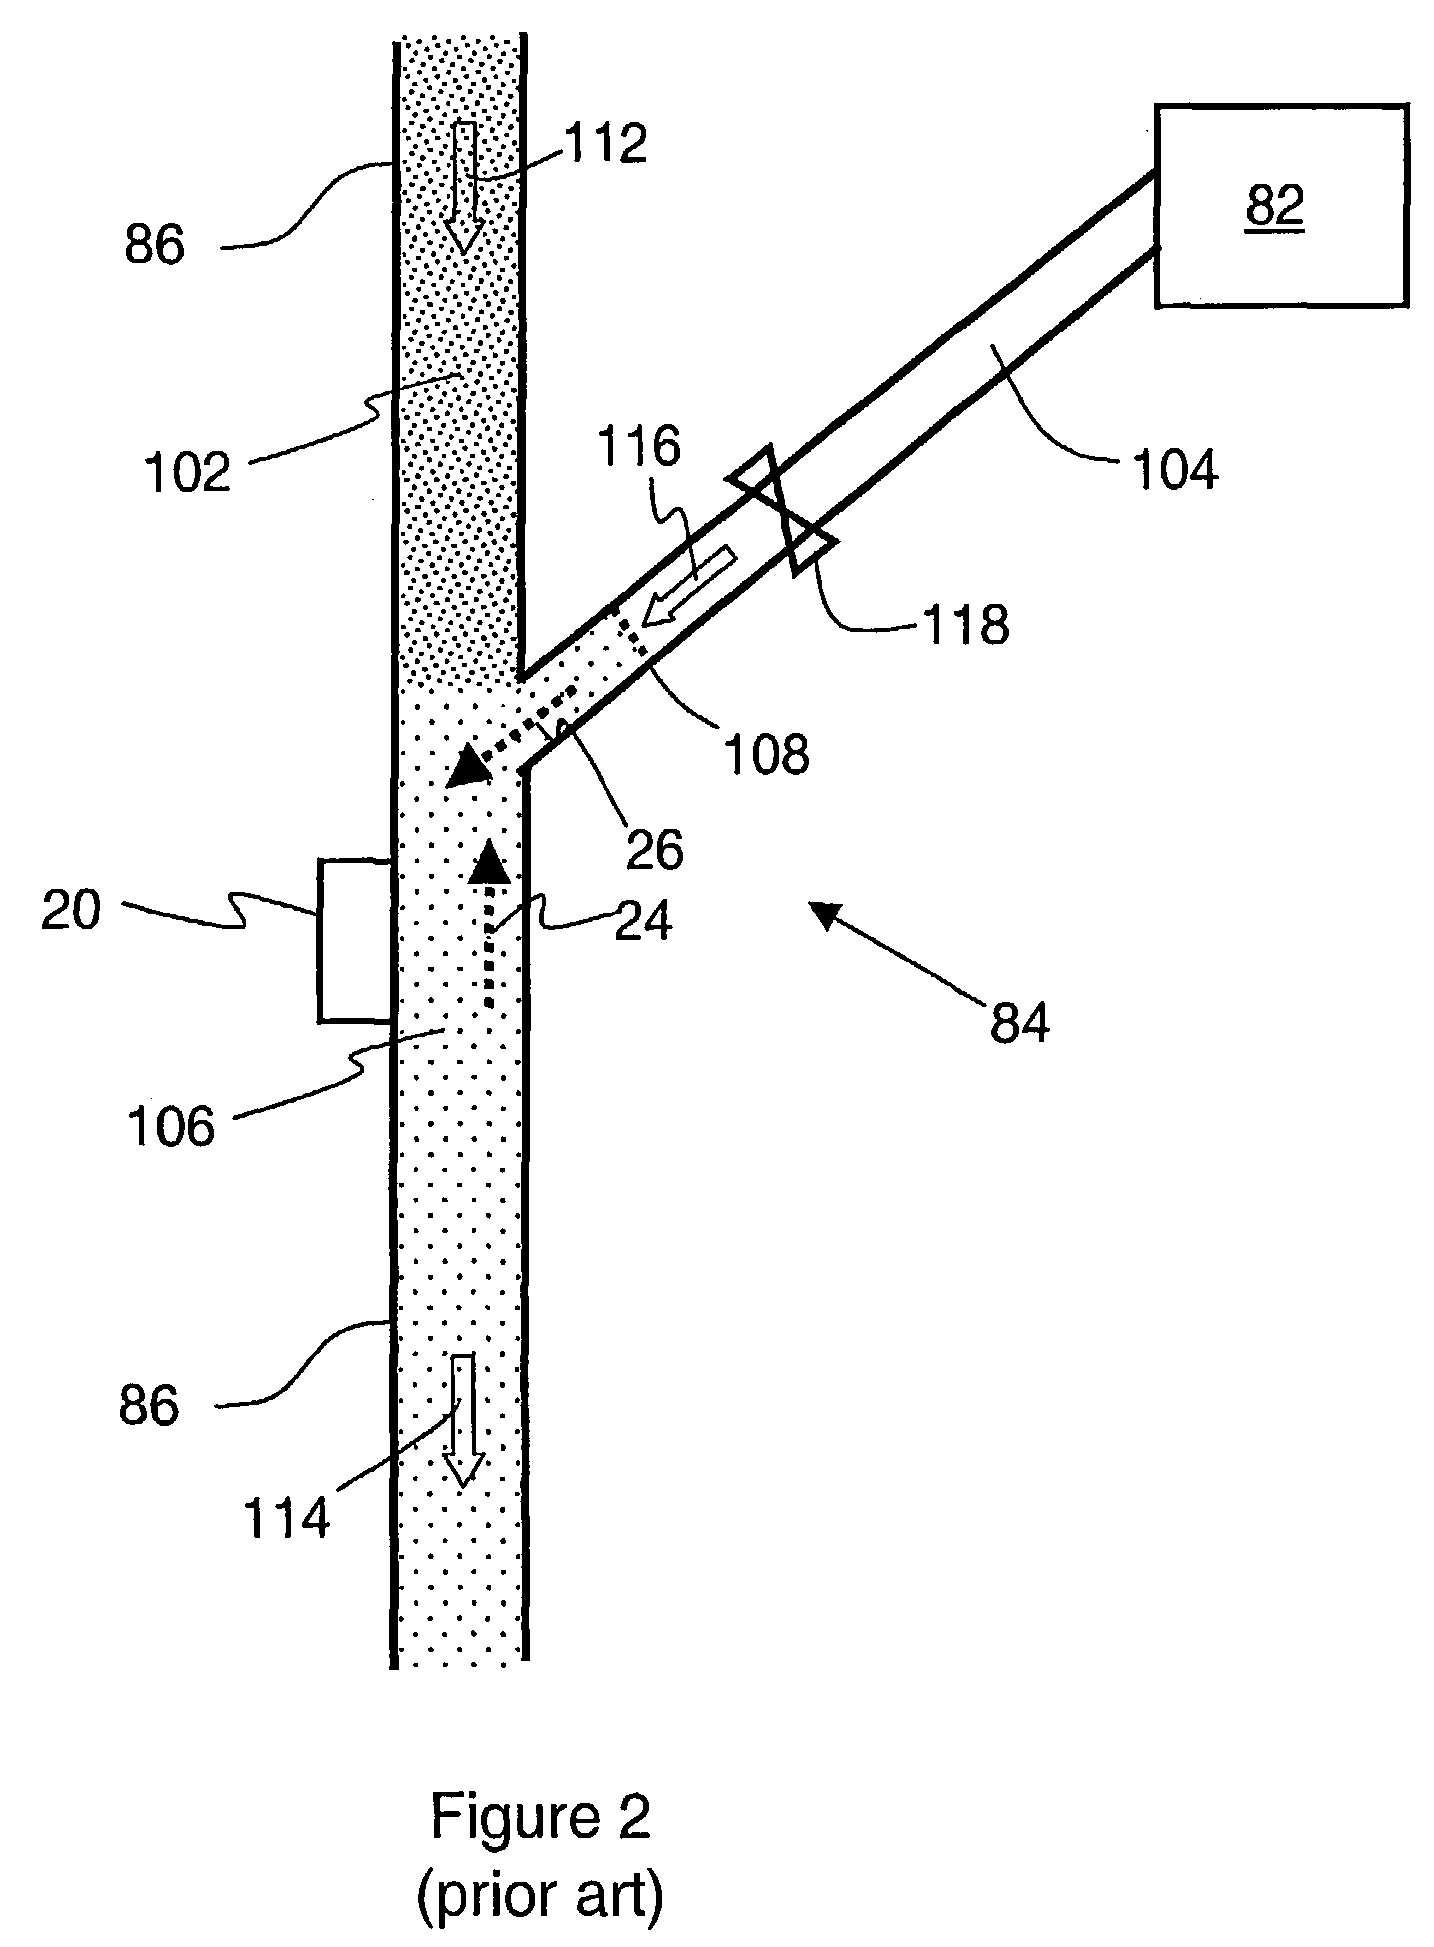 Method and apparatus for enhanced acoustic mud pulse telemetry during underbalanced drilling